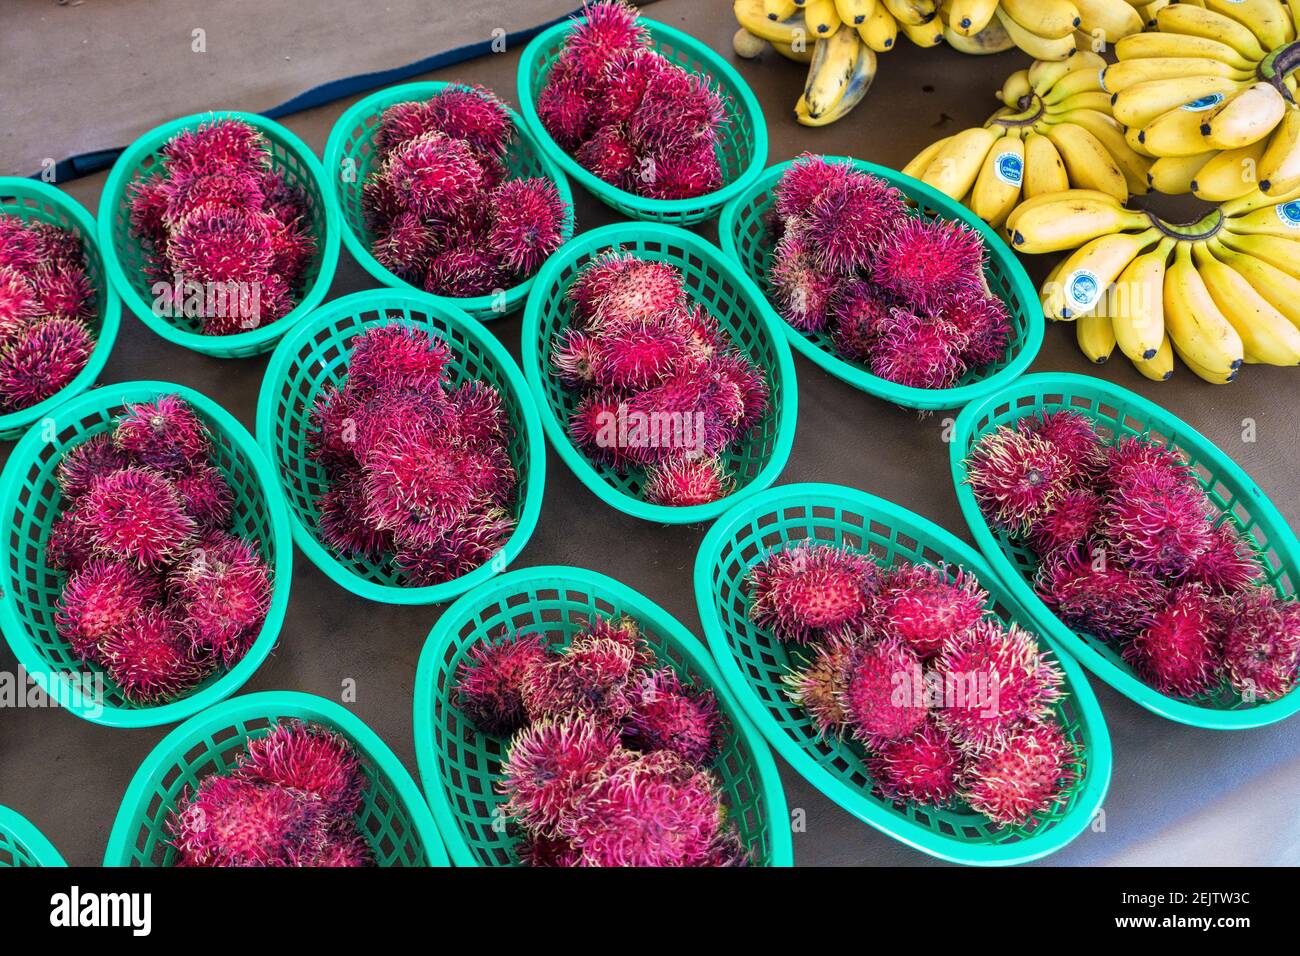 Baskets of tropical rambutan fruit for sale at an outdoor market on the Lincoln Road Mall in Miami Beach, Florida. Stock Photo